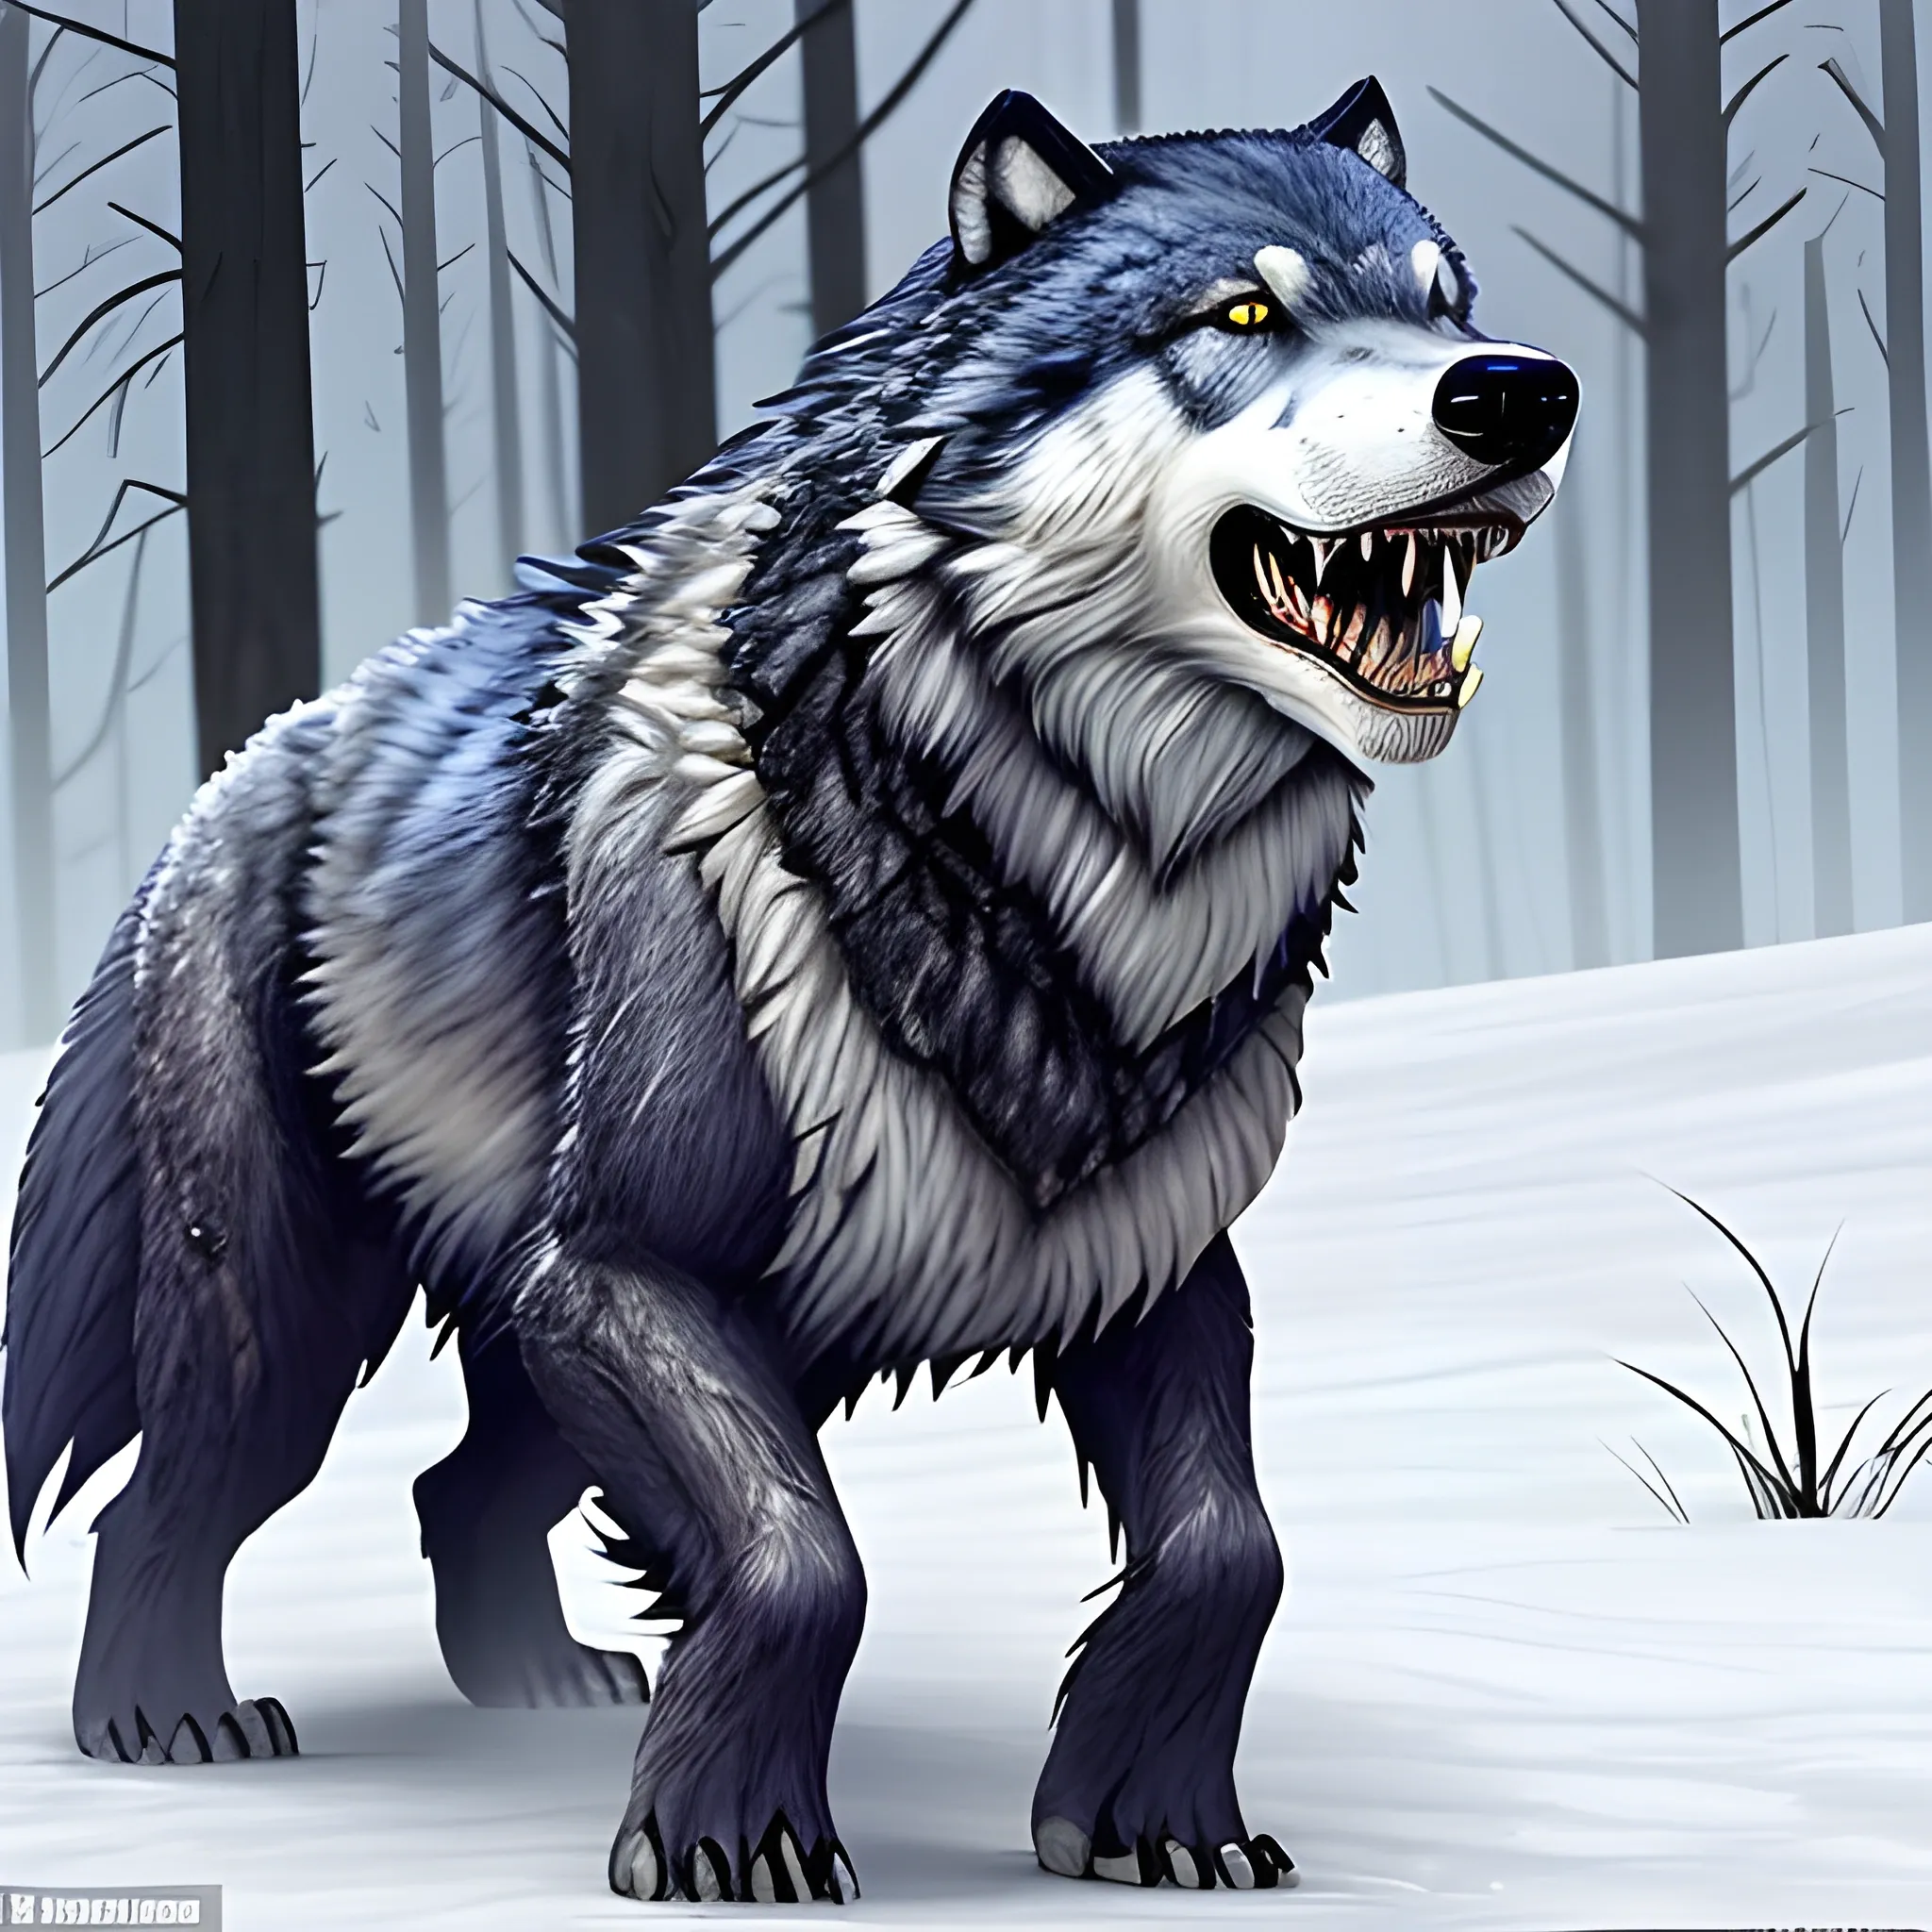 Appearance: The dire wolf is a massive and fearsome creature, closely related to the regular wolf but significantly larger and more imposing. It stands at around 4 to 5 feet tall at the shoulder and can weigh up to 800 pounds or more, dwarfing its smaller cousins. Its fur coat is thick and usually ranges in color from gray to black, providing excellent camouflage in various environments. The dire wolf's powerful jaws and sharp teeth make it a formidable predator in the wild.

Features: The dire wolf shares many features with regular wolves but possesses even more enhanced physical capabilities. Its heightened strength, speed, and endurance make it a top-tier predator, capable of taking down large prey with ease. The dire wolf's large, muscular build and powerful limbs give it the advantage of overwhelming its opponents in combat.

Habitat: Dire wolves tend to inhabit the wildest and most remote regions of your DND world, far away from civilization. They can be found in dense forests, icy tundras, and even rugged mountainous terrain. As apex predators, they rule over their territories and command respect from other creatures in their domain.

Behavior: Like their smaller counterparts, dire wolves are social creatures that often form packs to hunt and survive. They exhibit strong loyalty to their packmates, and the alpha pair leads the group with a mix of intelligence and ferocity. Dire wolves are skilled hunters and work together to bring down formidable prey, such as large mammals and even other monstrous creatures.